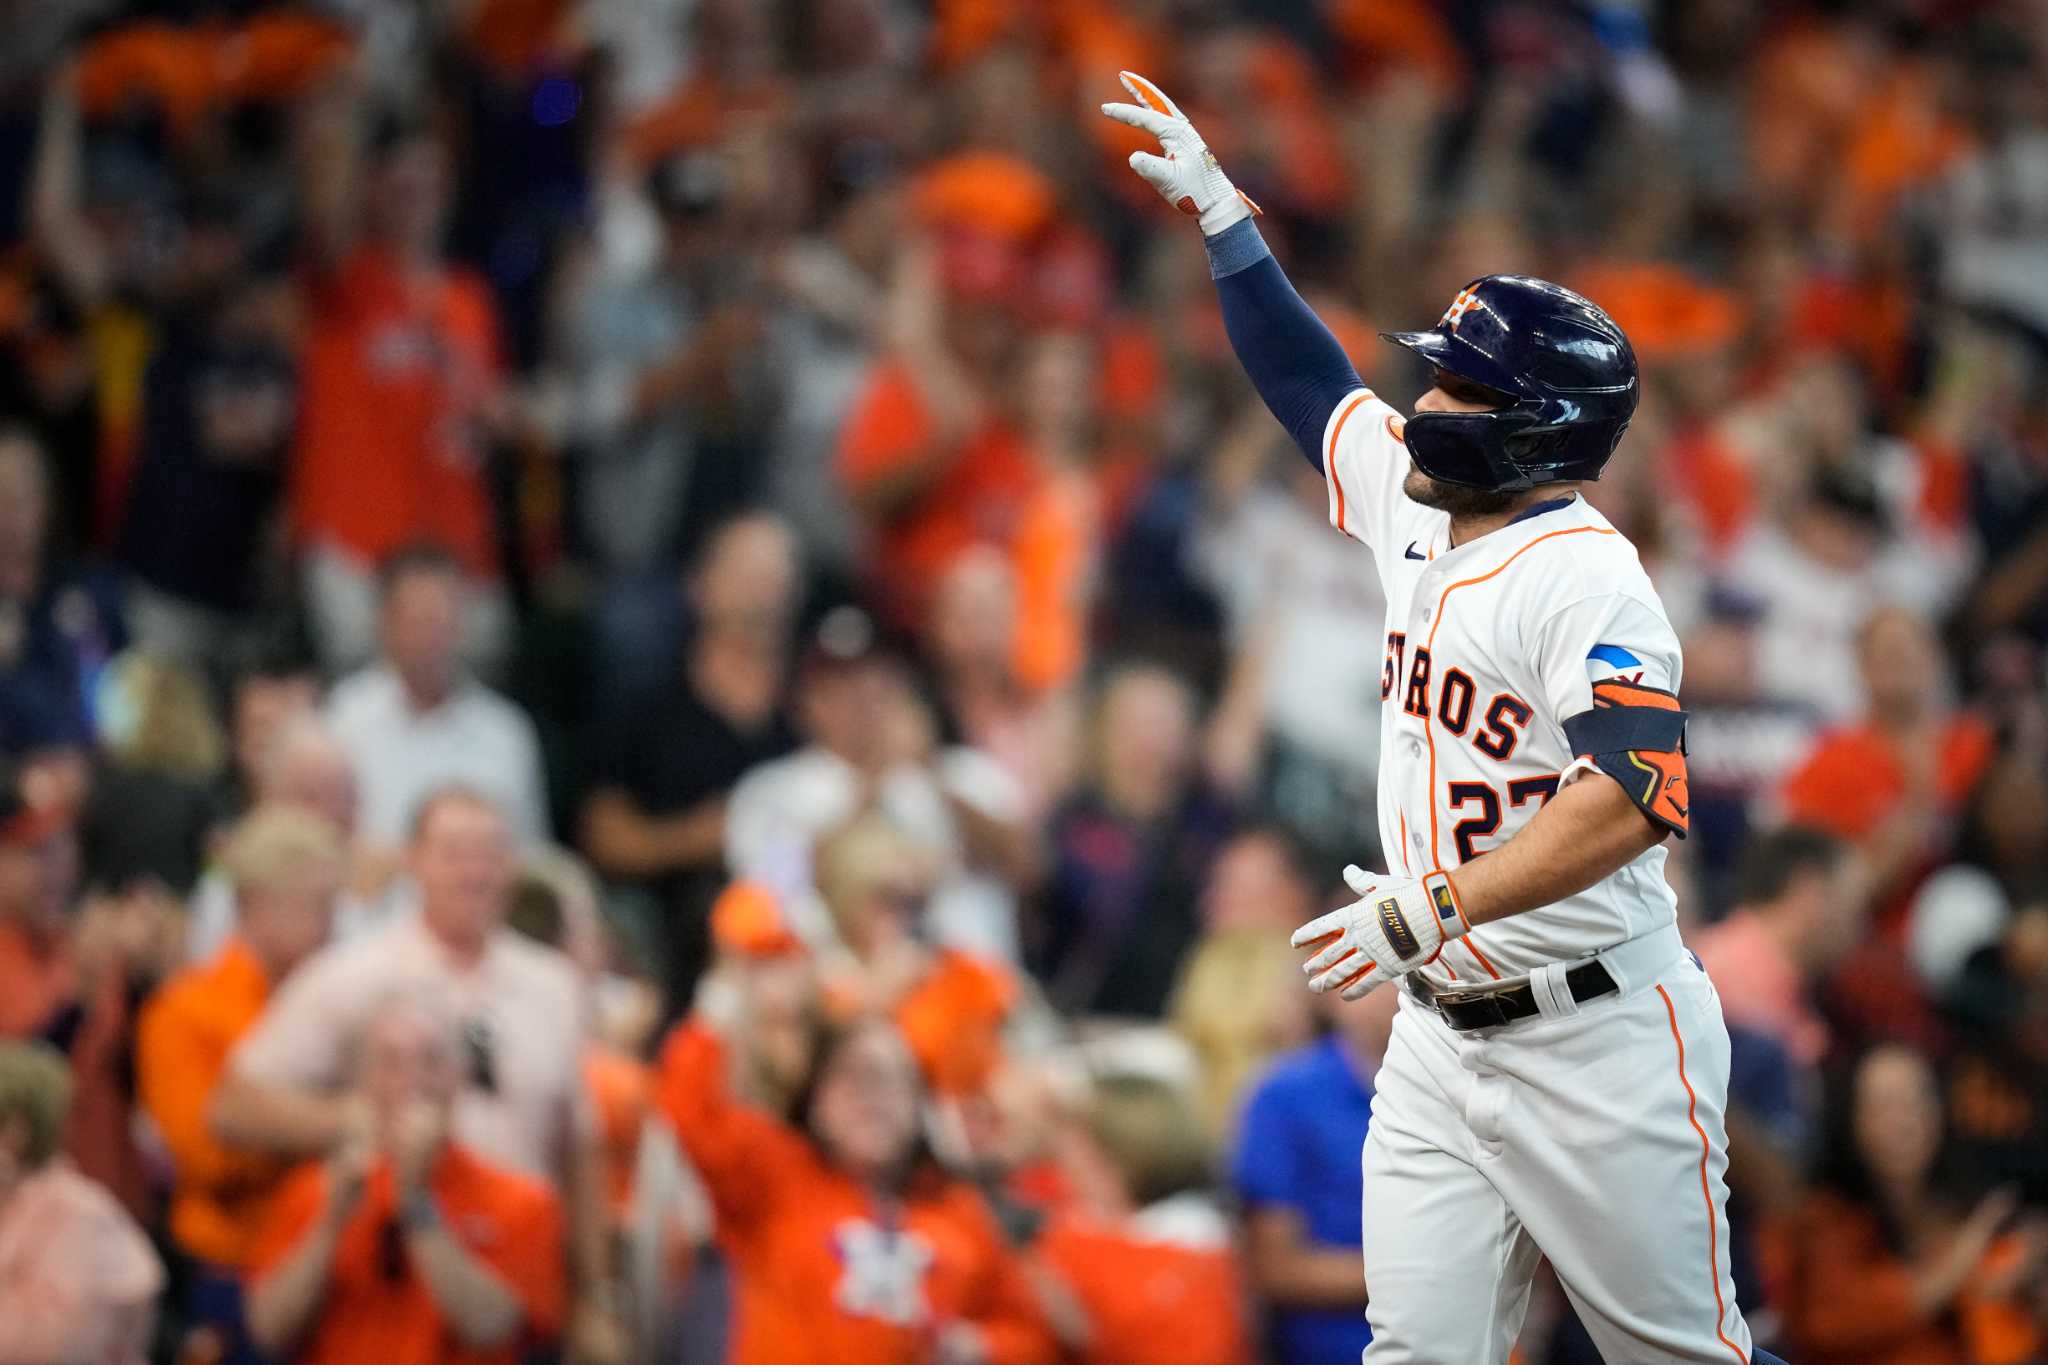 All-Star selections show Astros well-earned respect